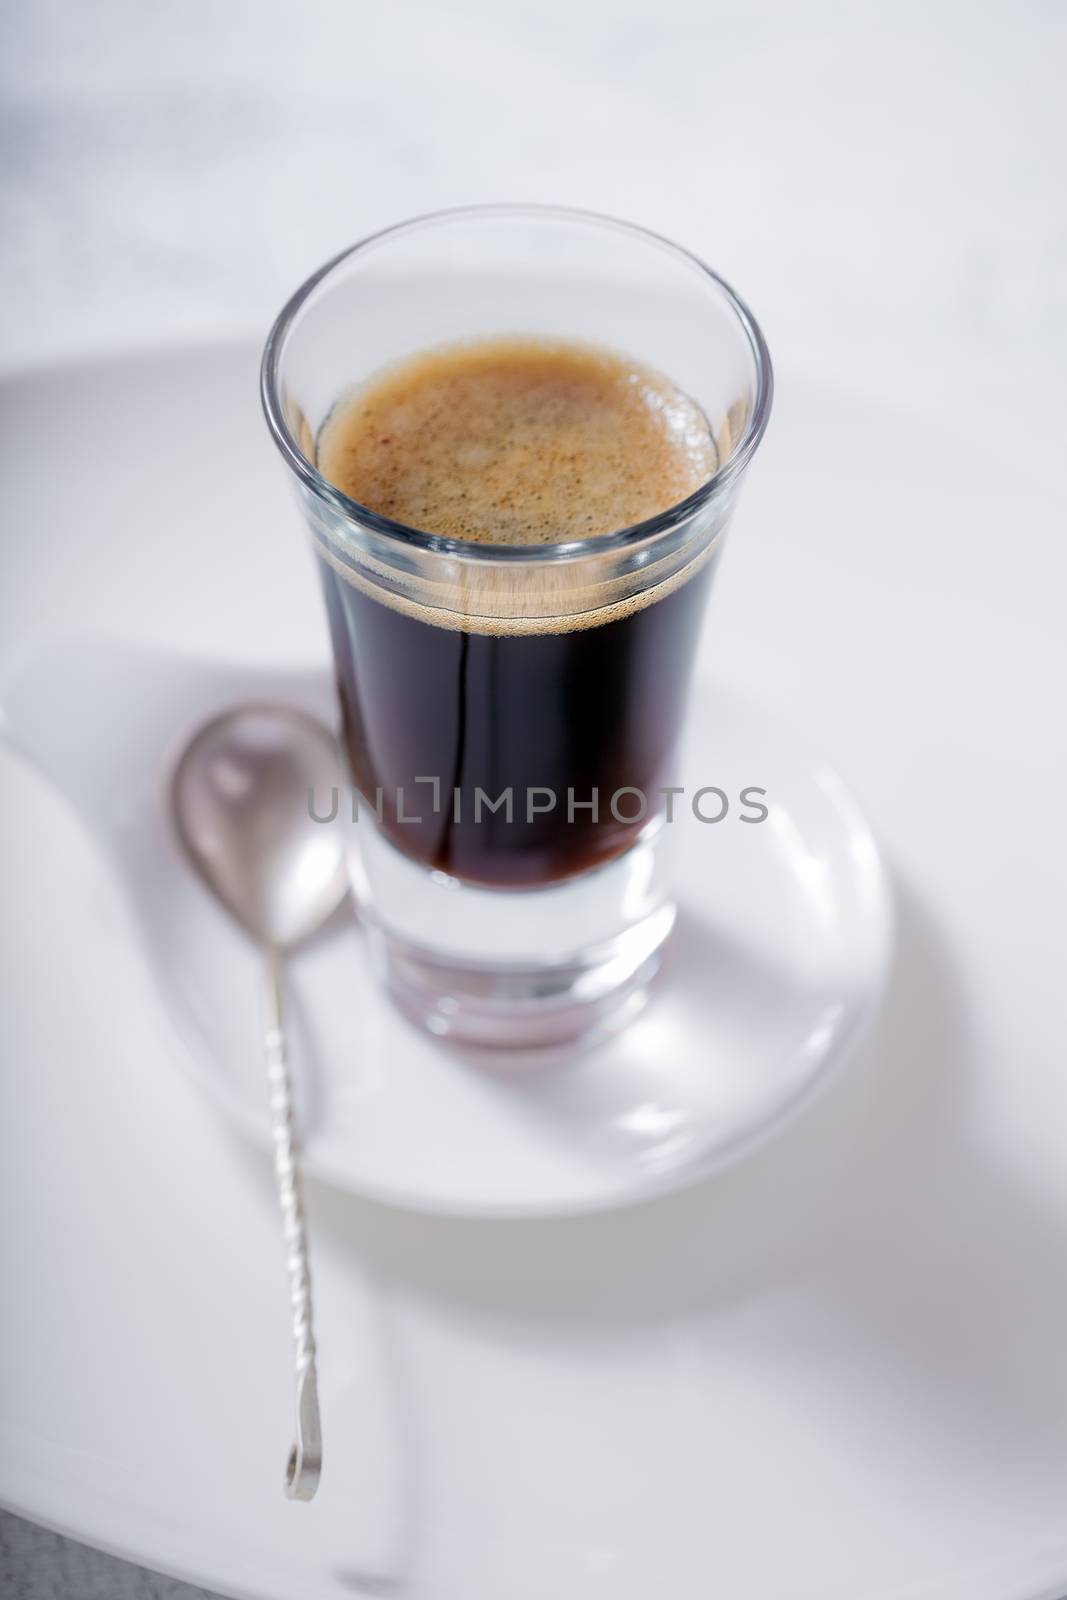 Cup of coffee espresso with a spoon